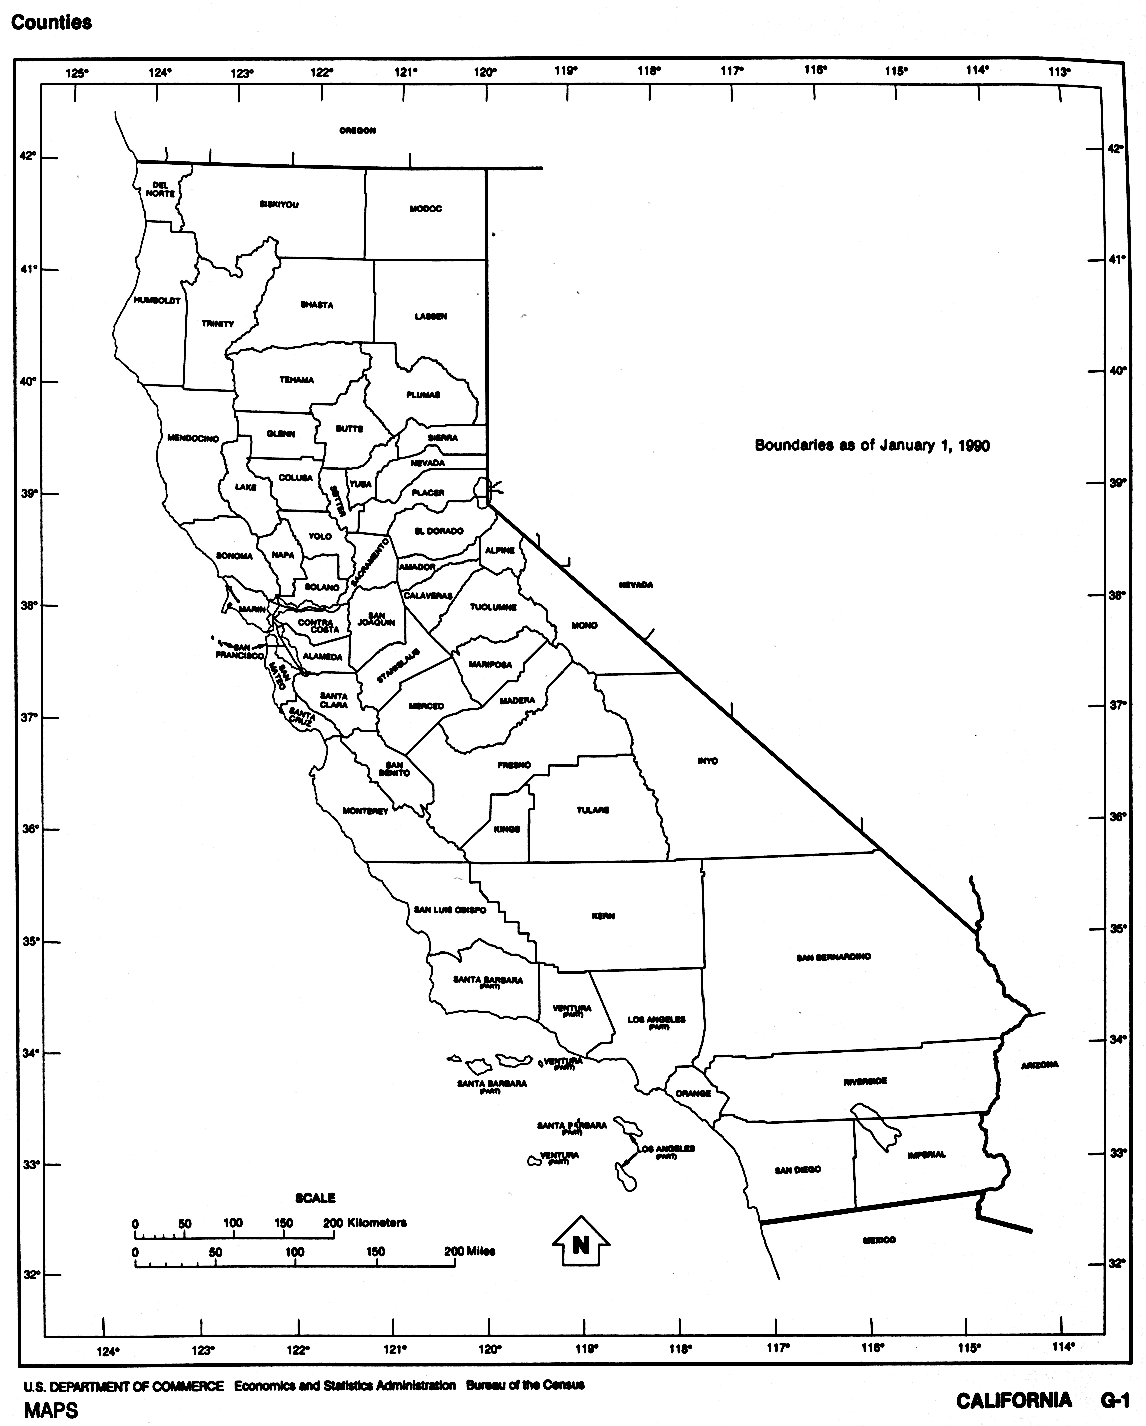 California+state+map+outline